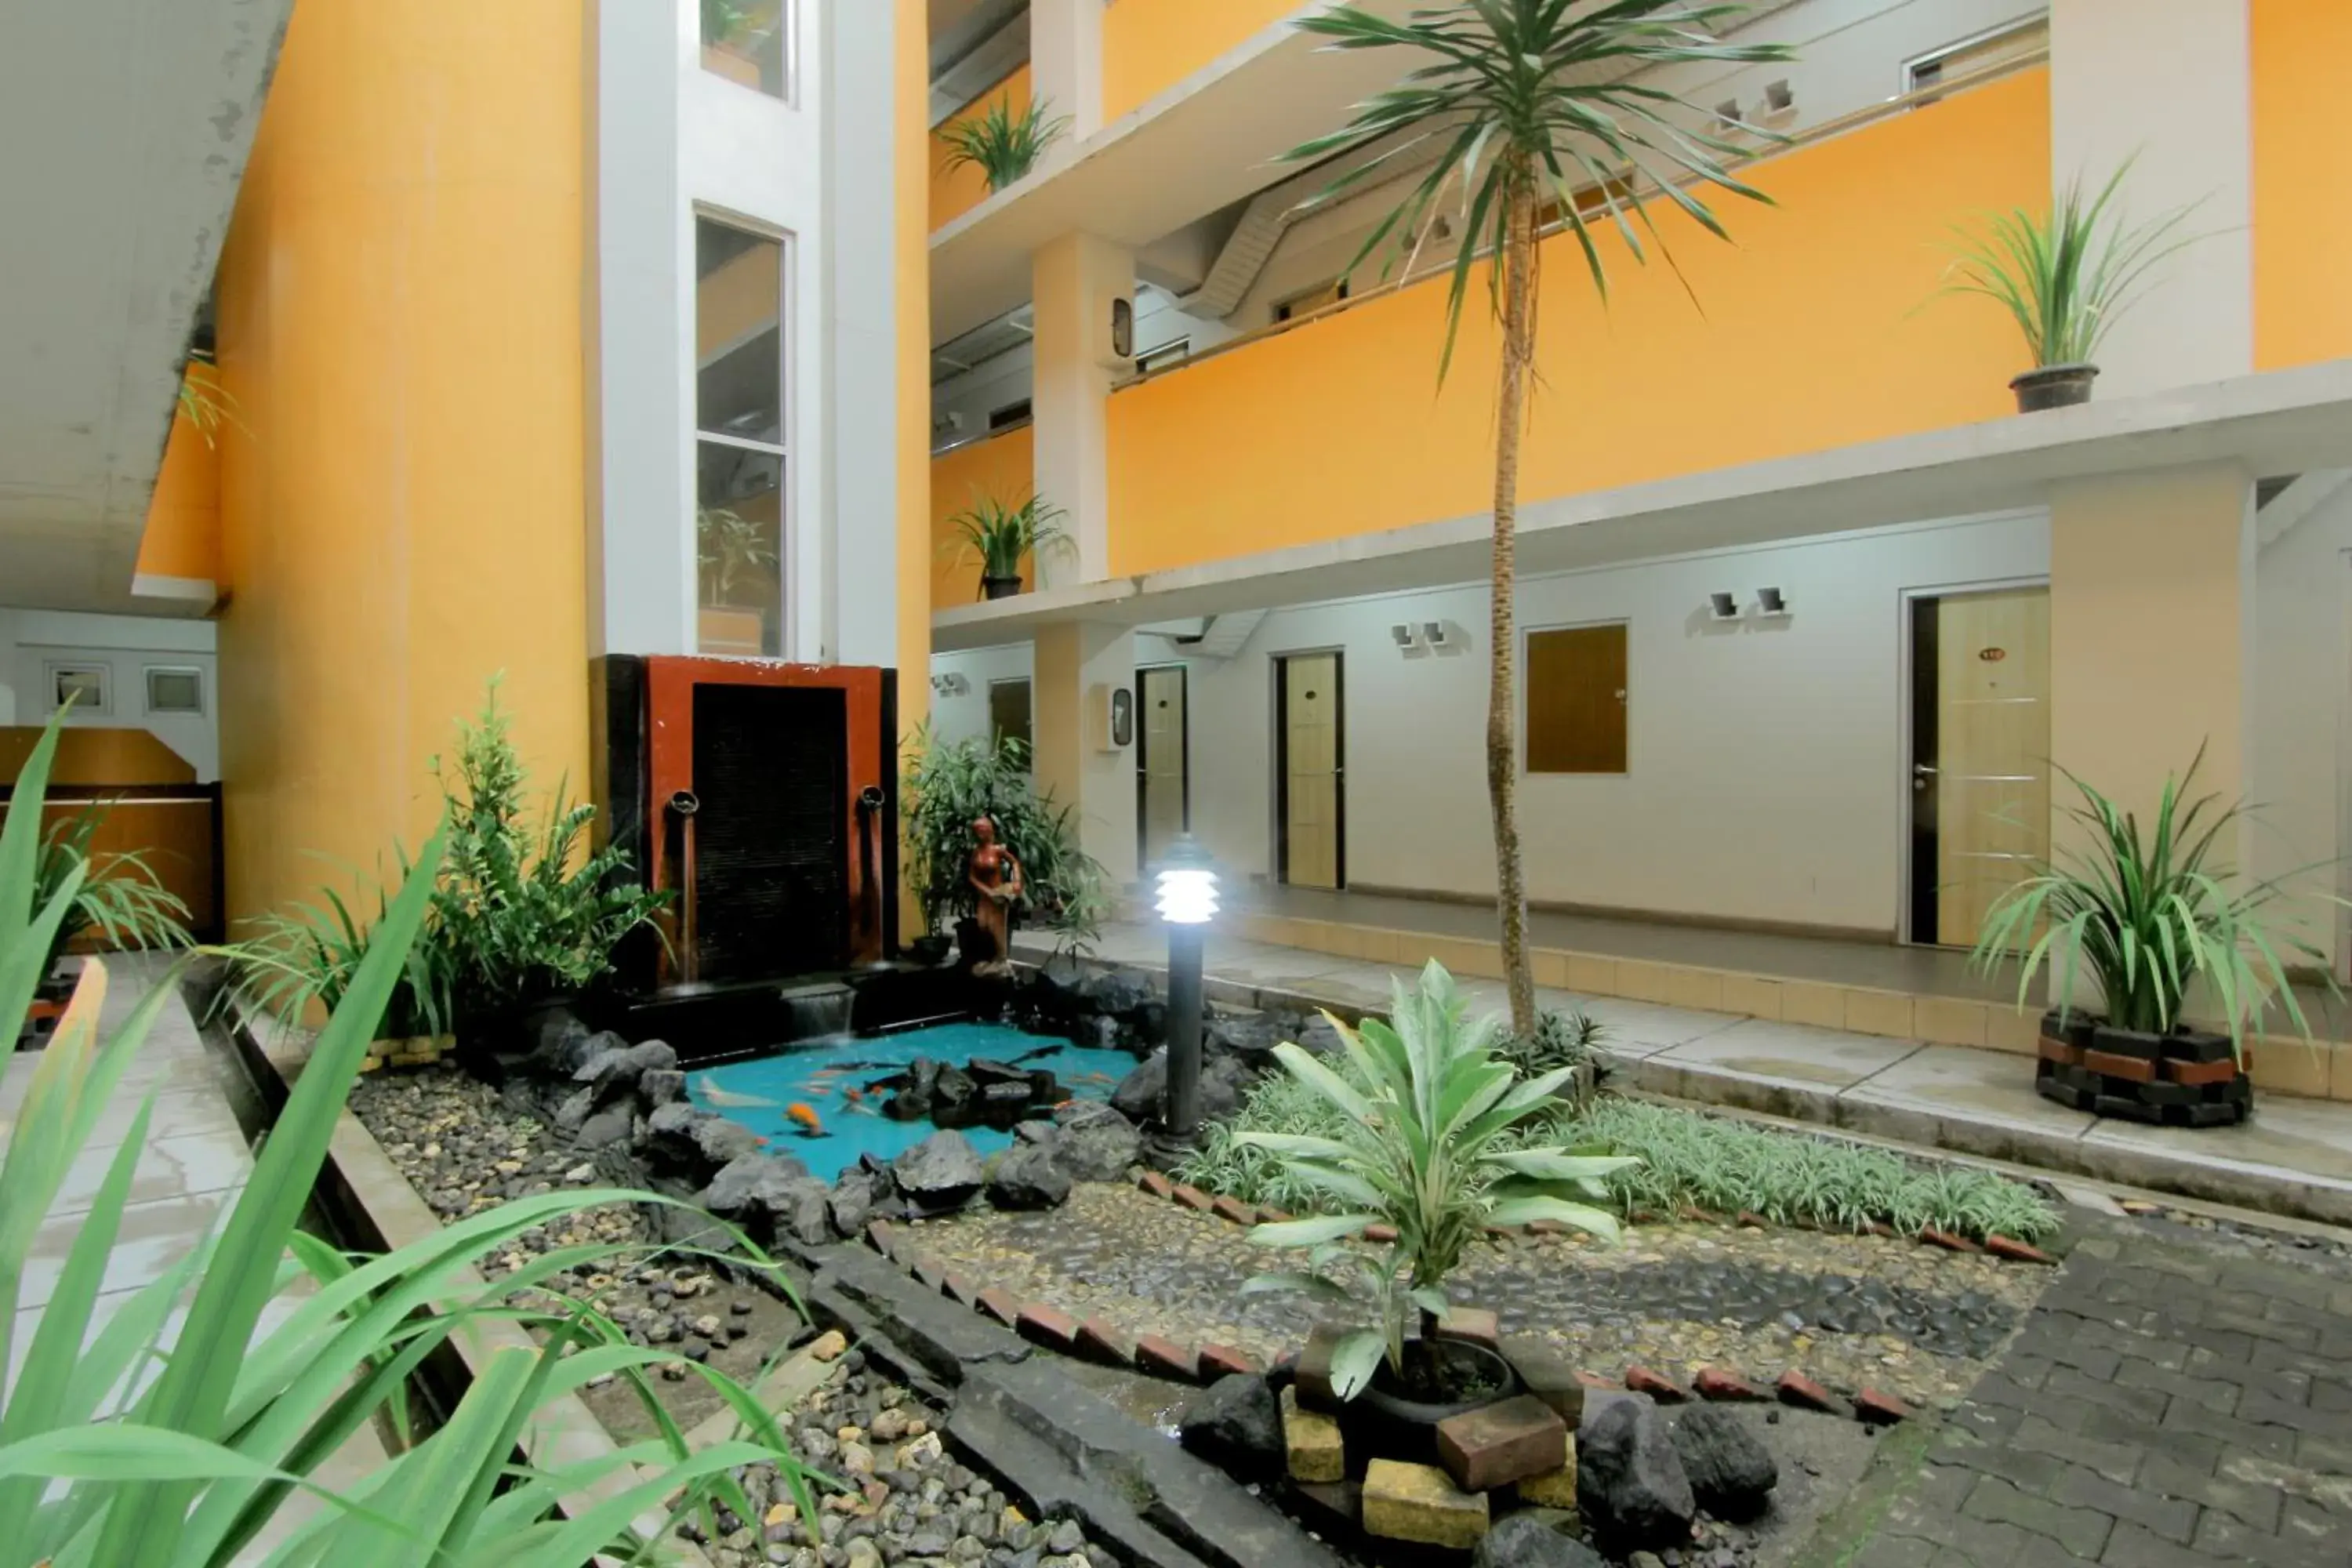 Area and facilities in University Hotel